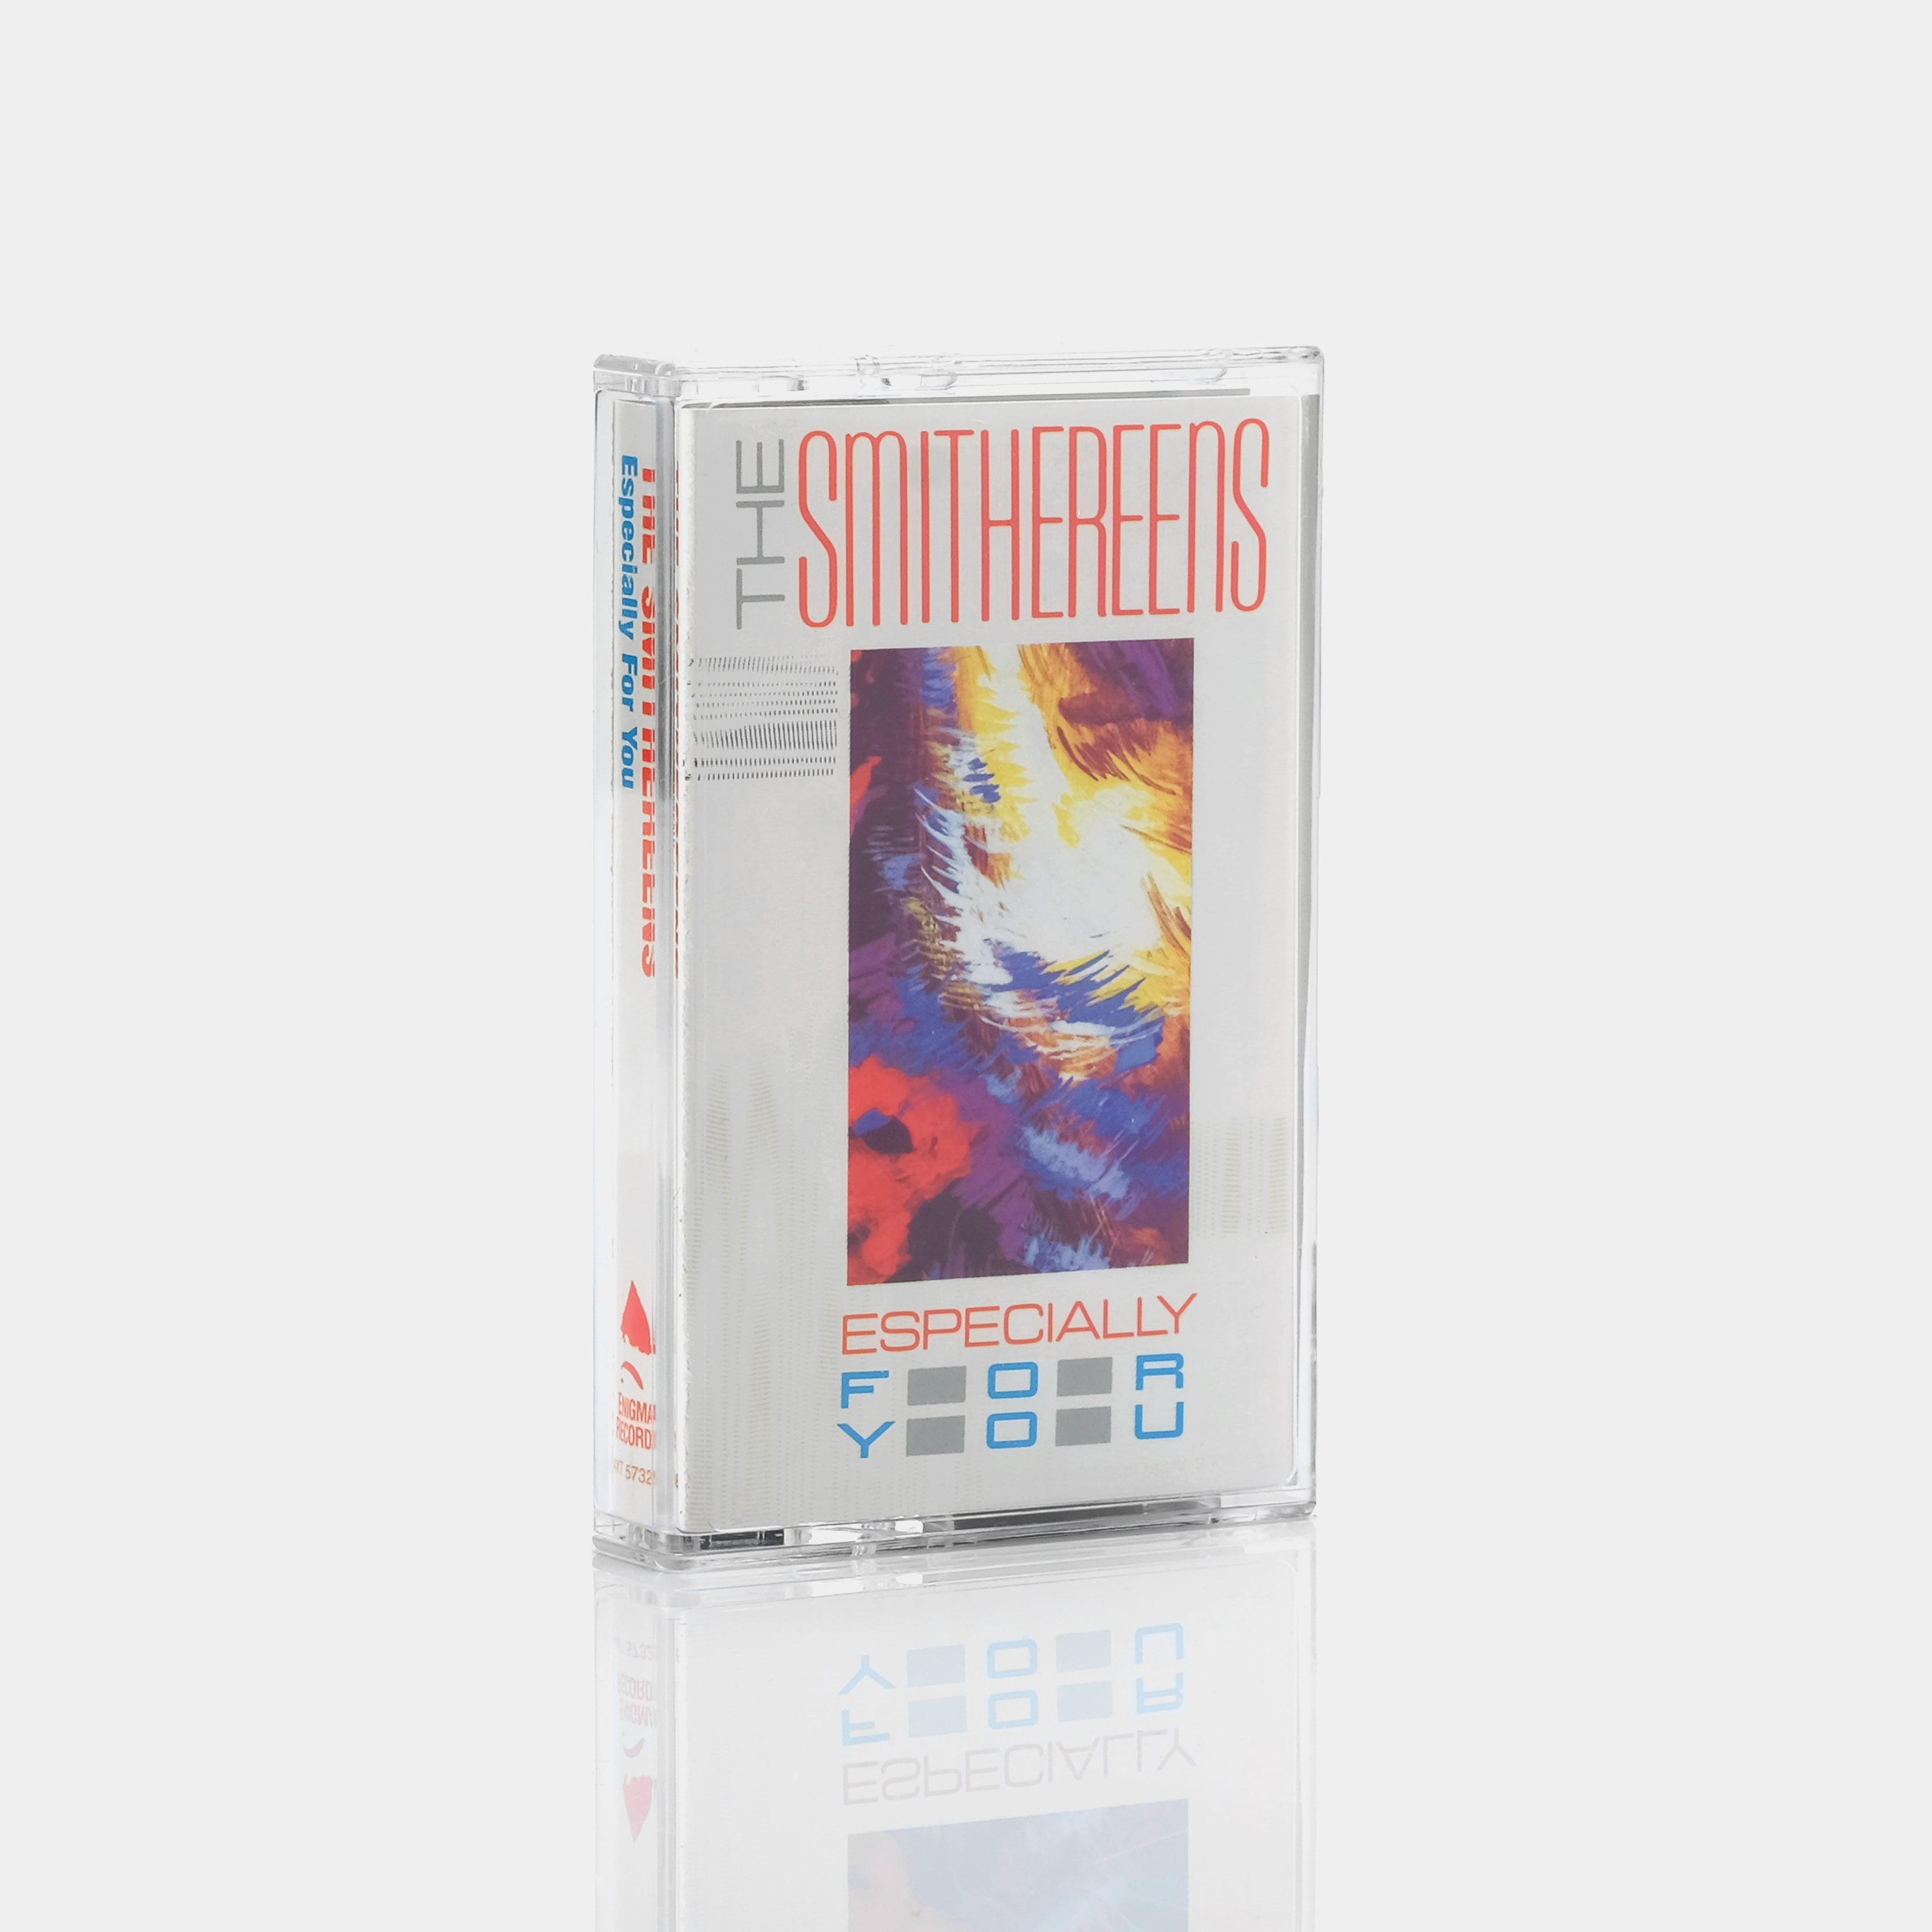 The Smithereens - Especially For You Cassette Tape